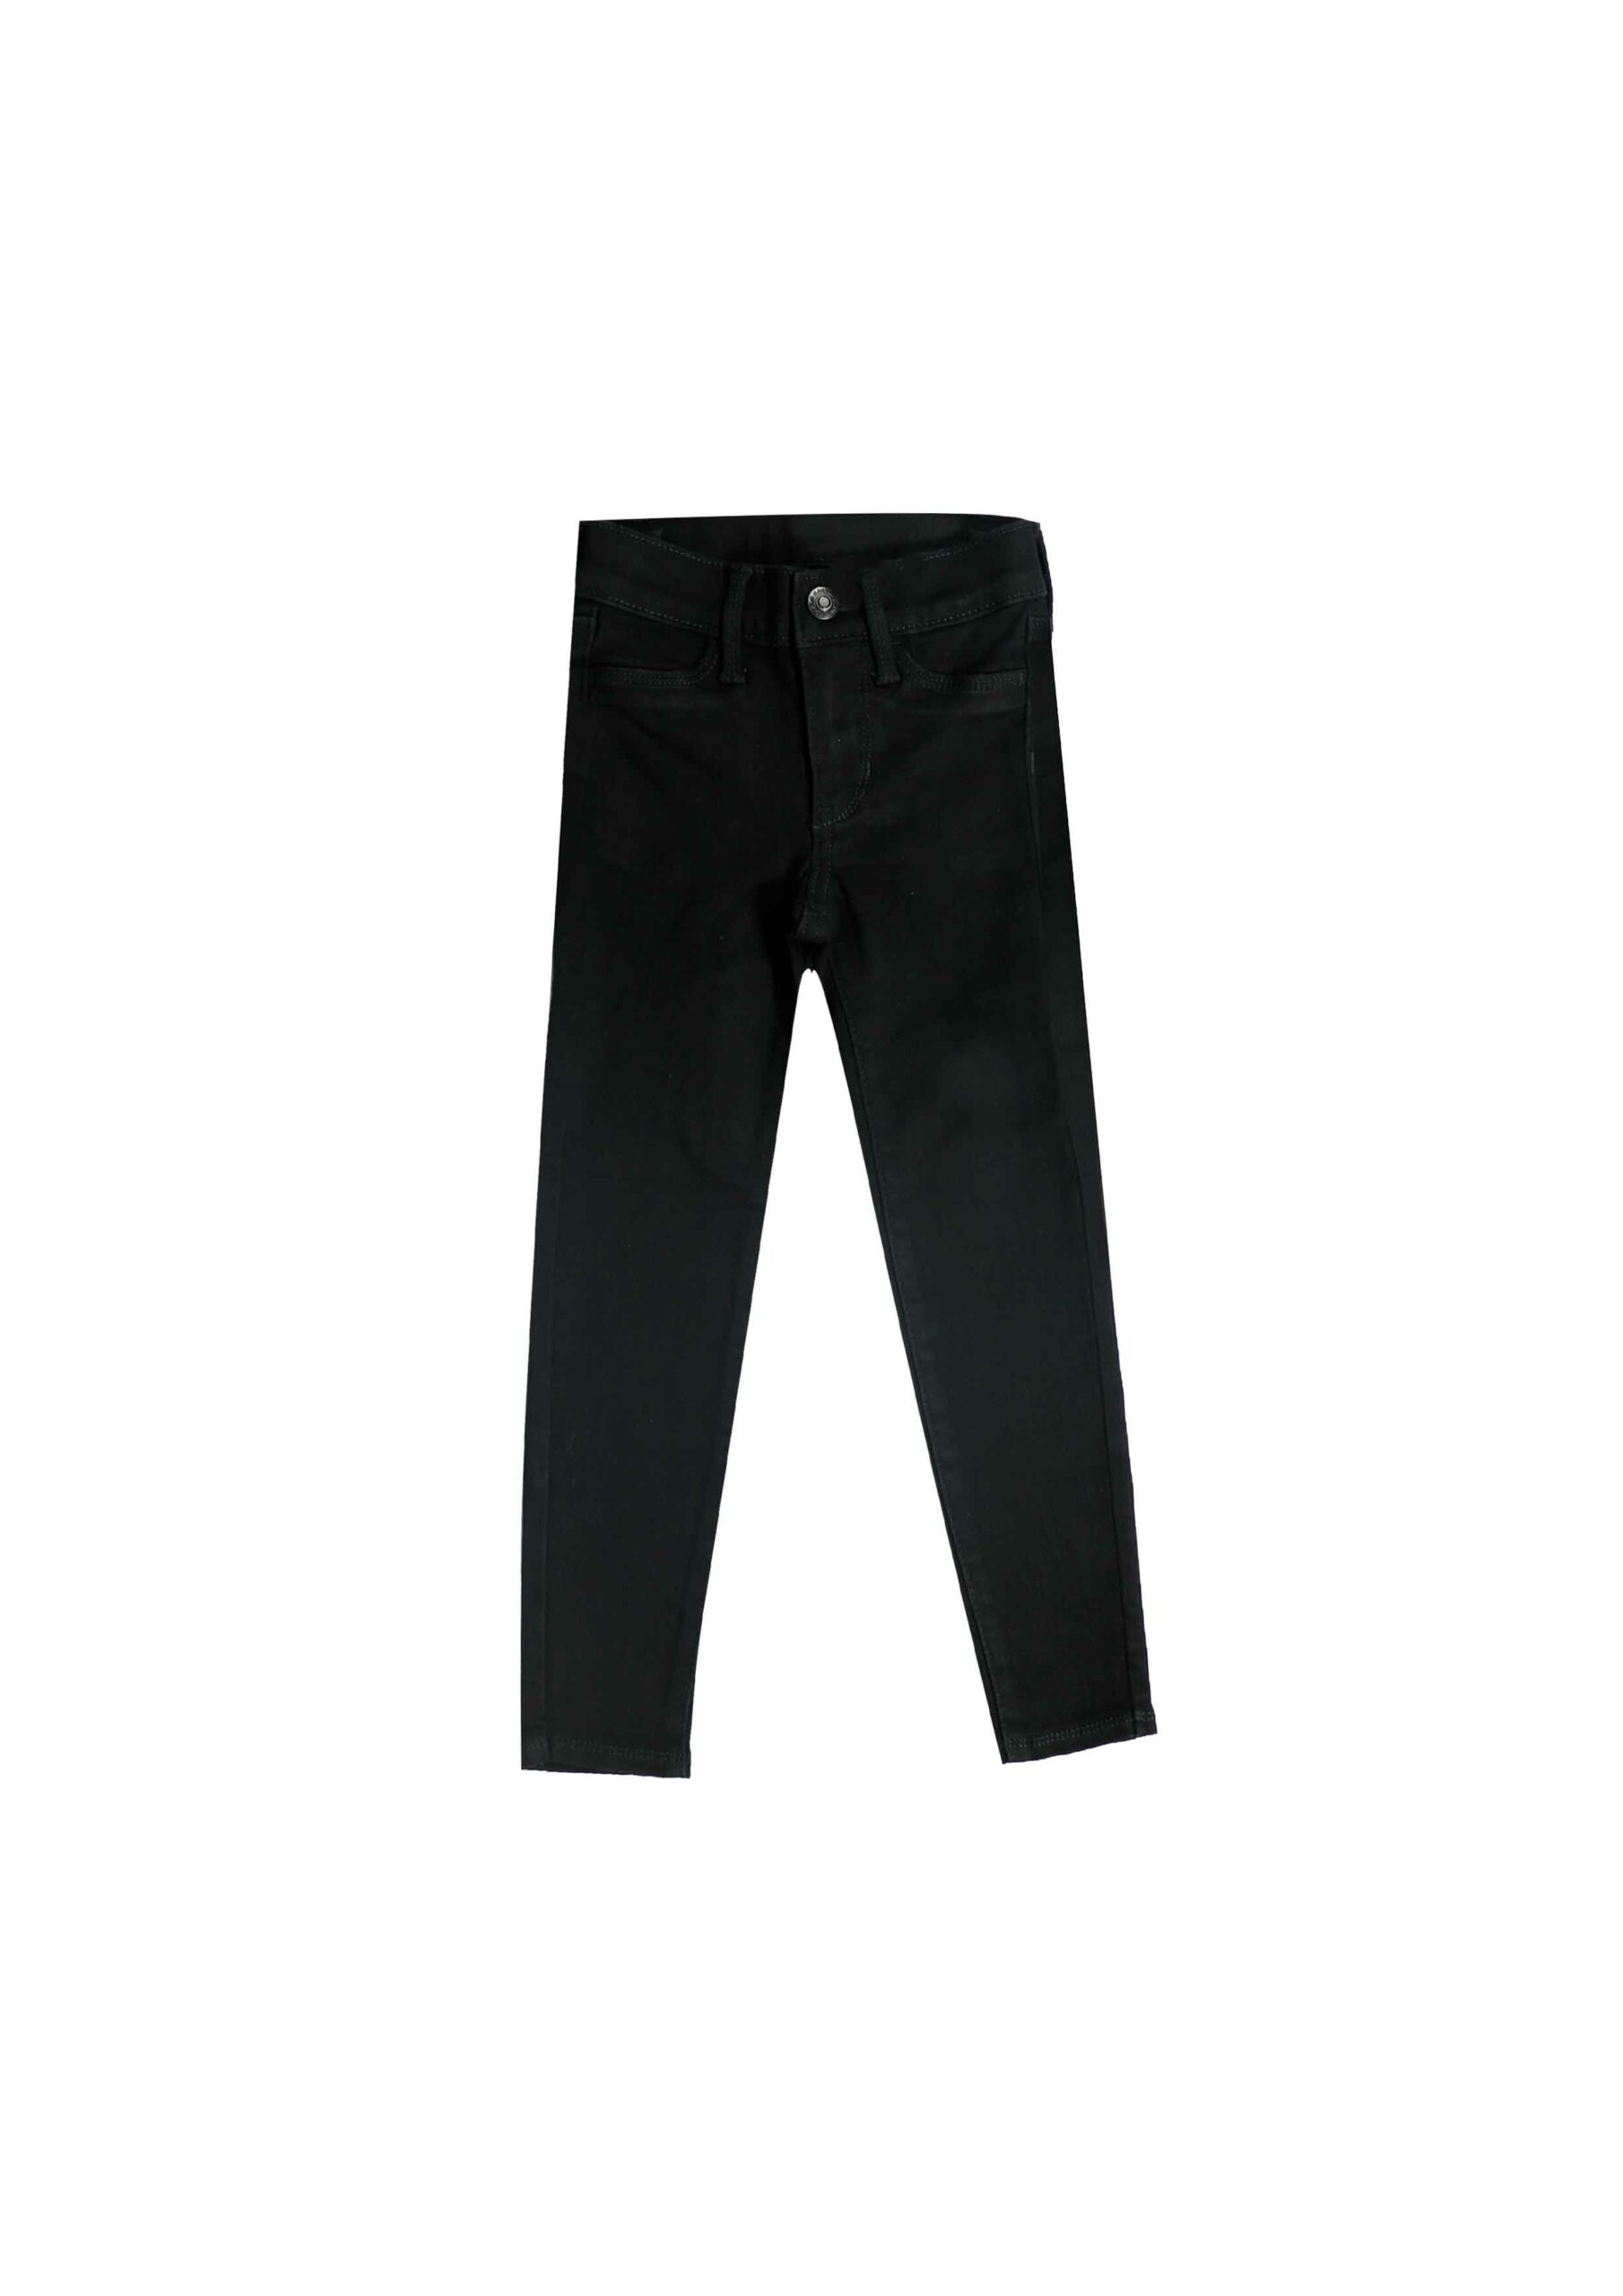 Girls Pant - Artisan Outfitters Ltd